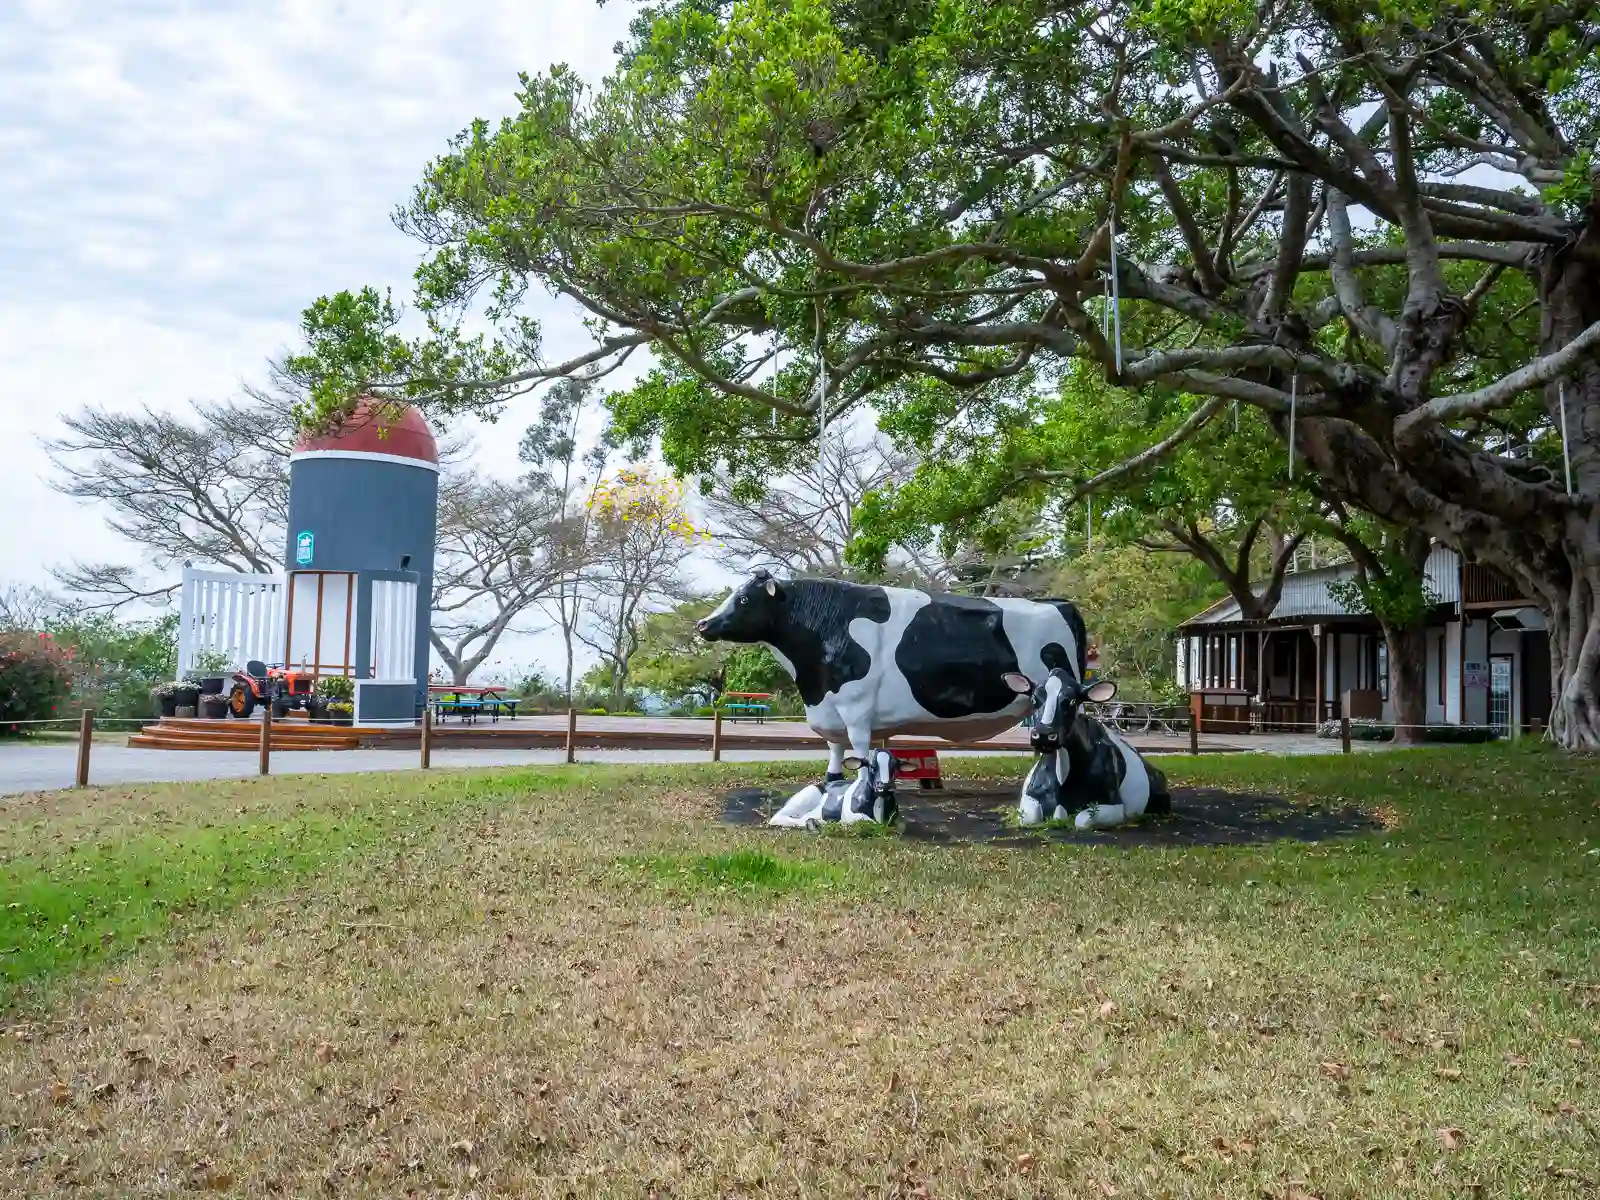 Larger-than-life cow statues stand in the grass outside of a building at Flying Cow Ranch.